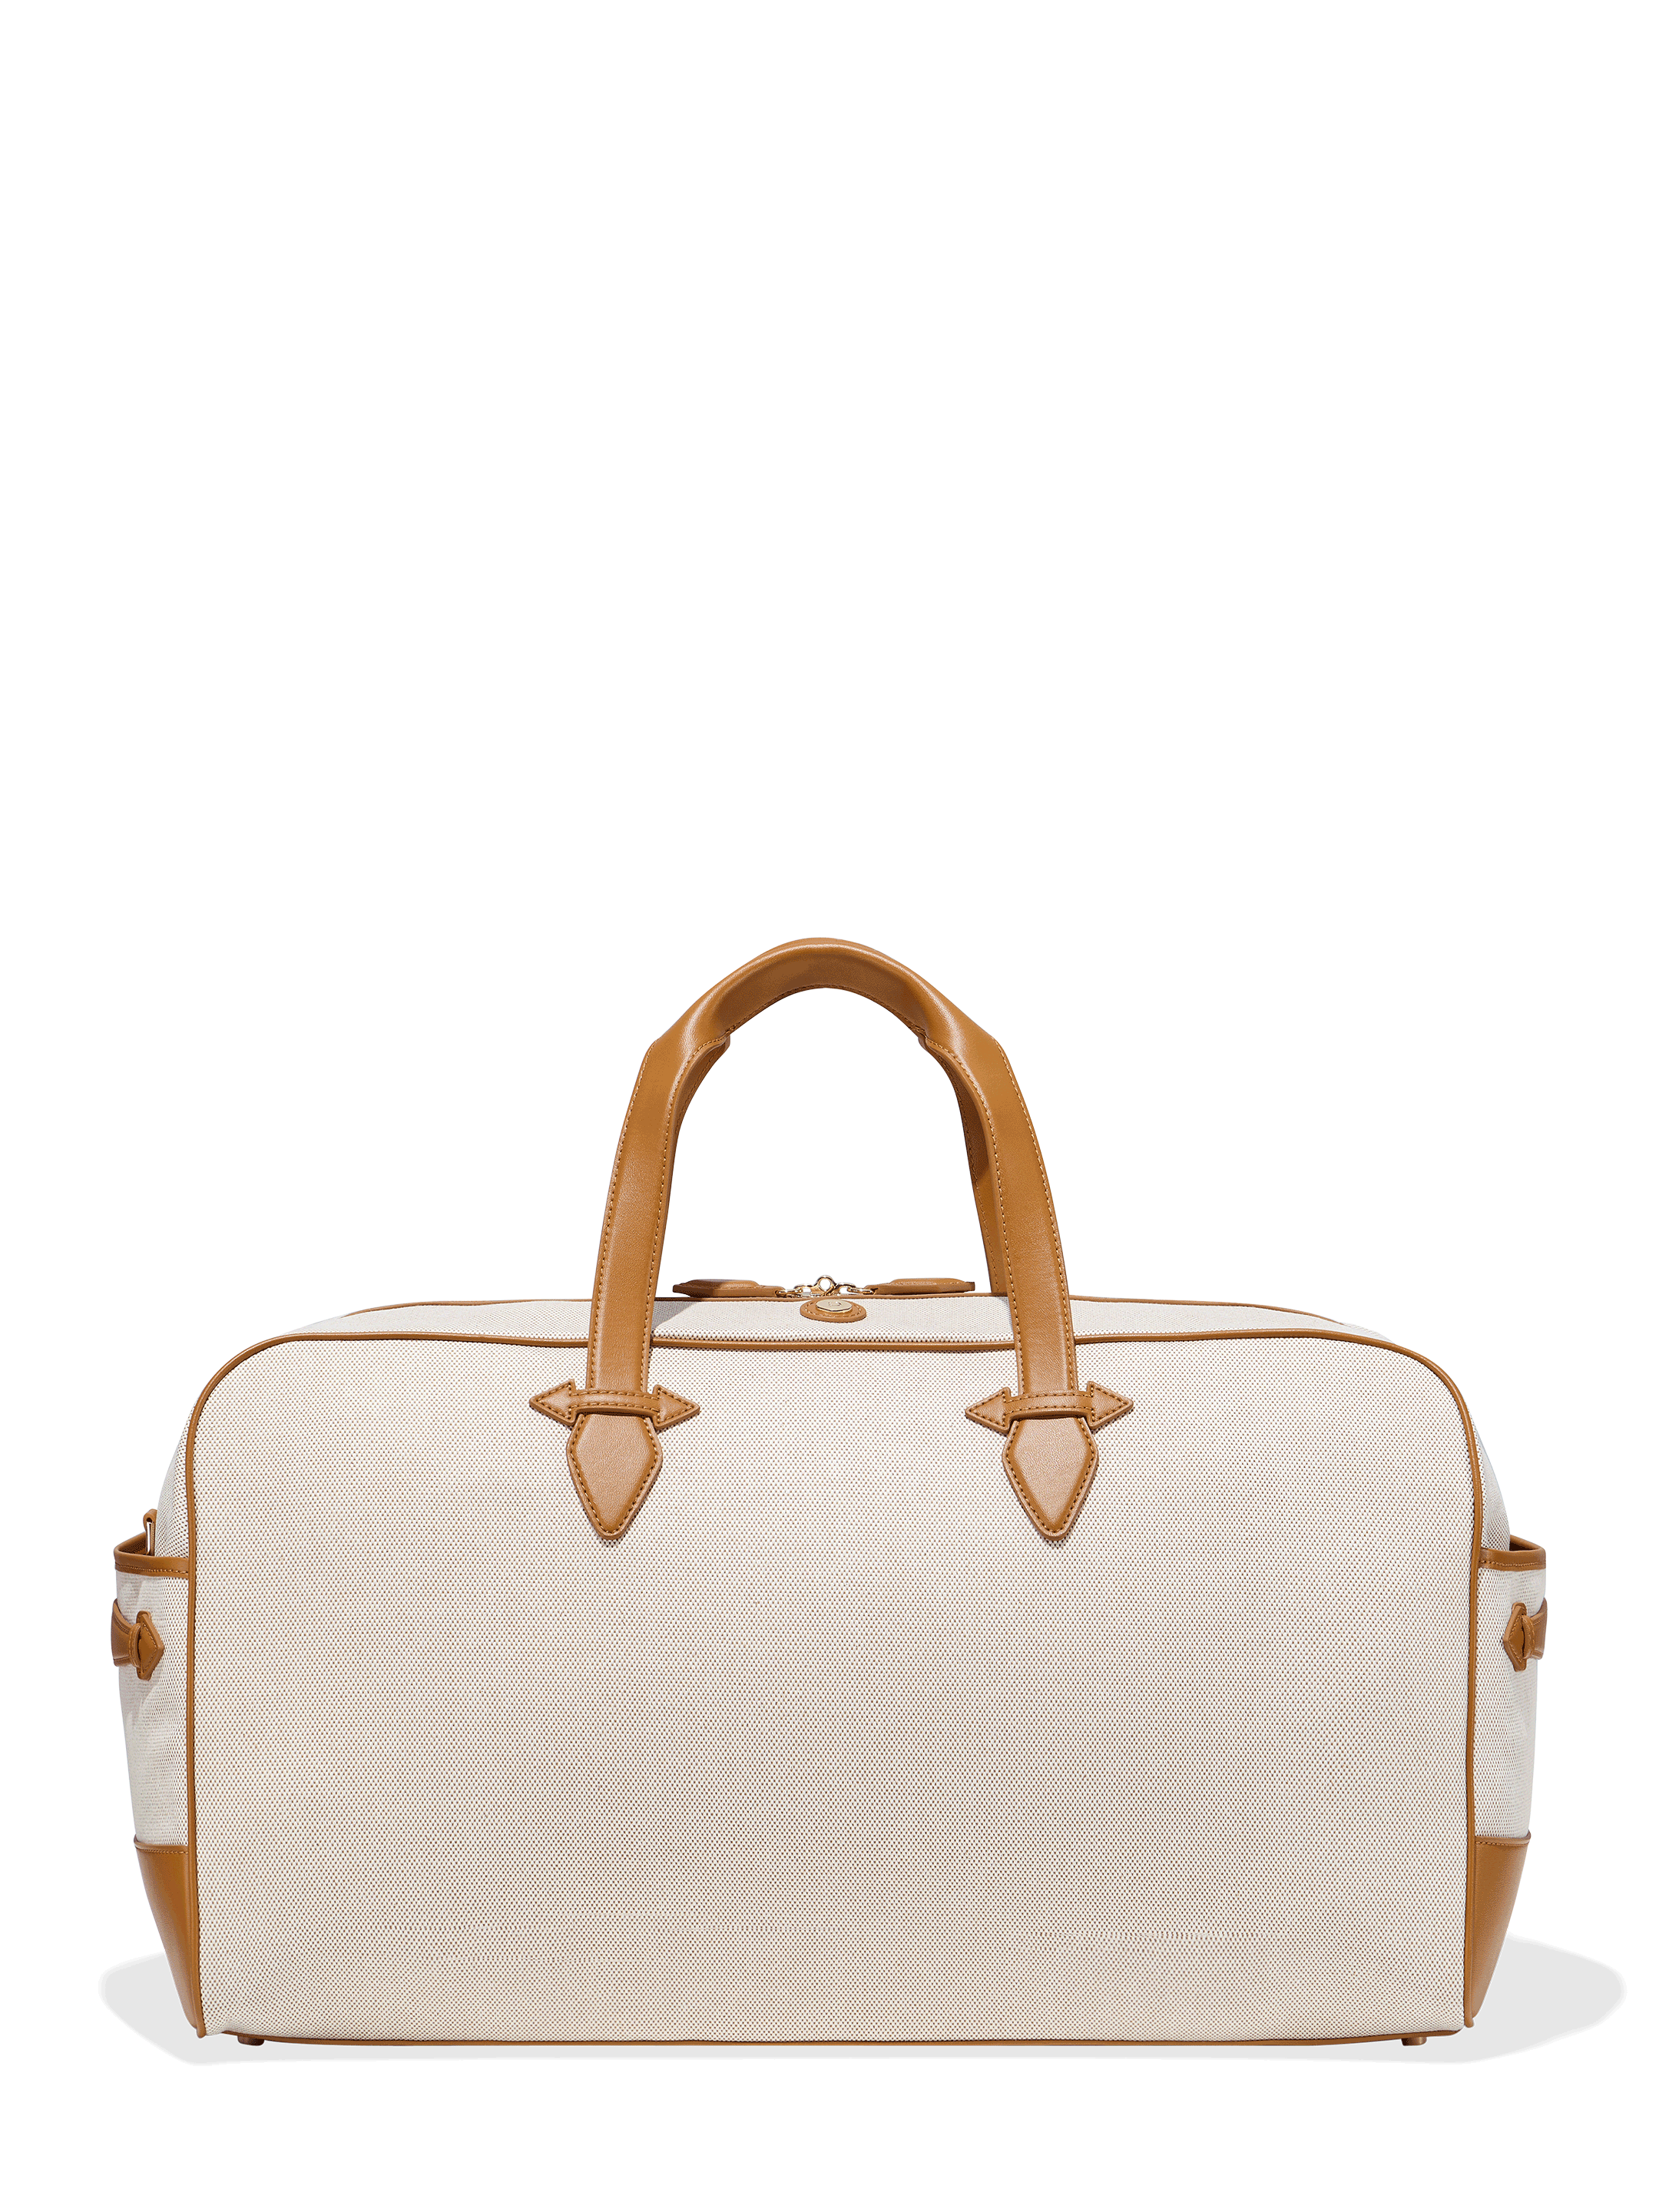 Louis Vuitton Large Monogram Suitcase Luggage With Combination -  Israel